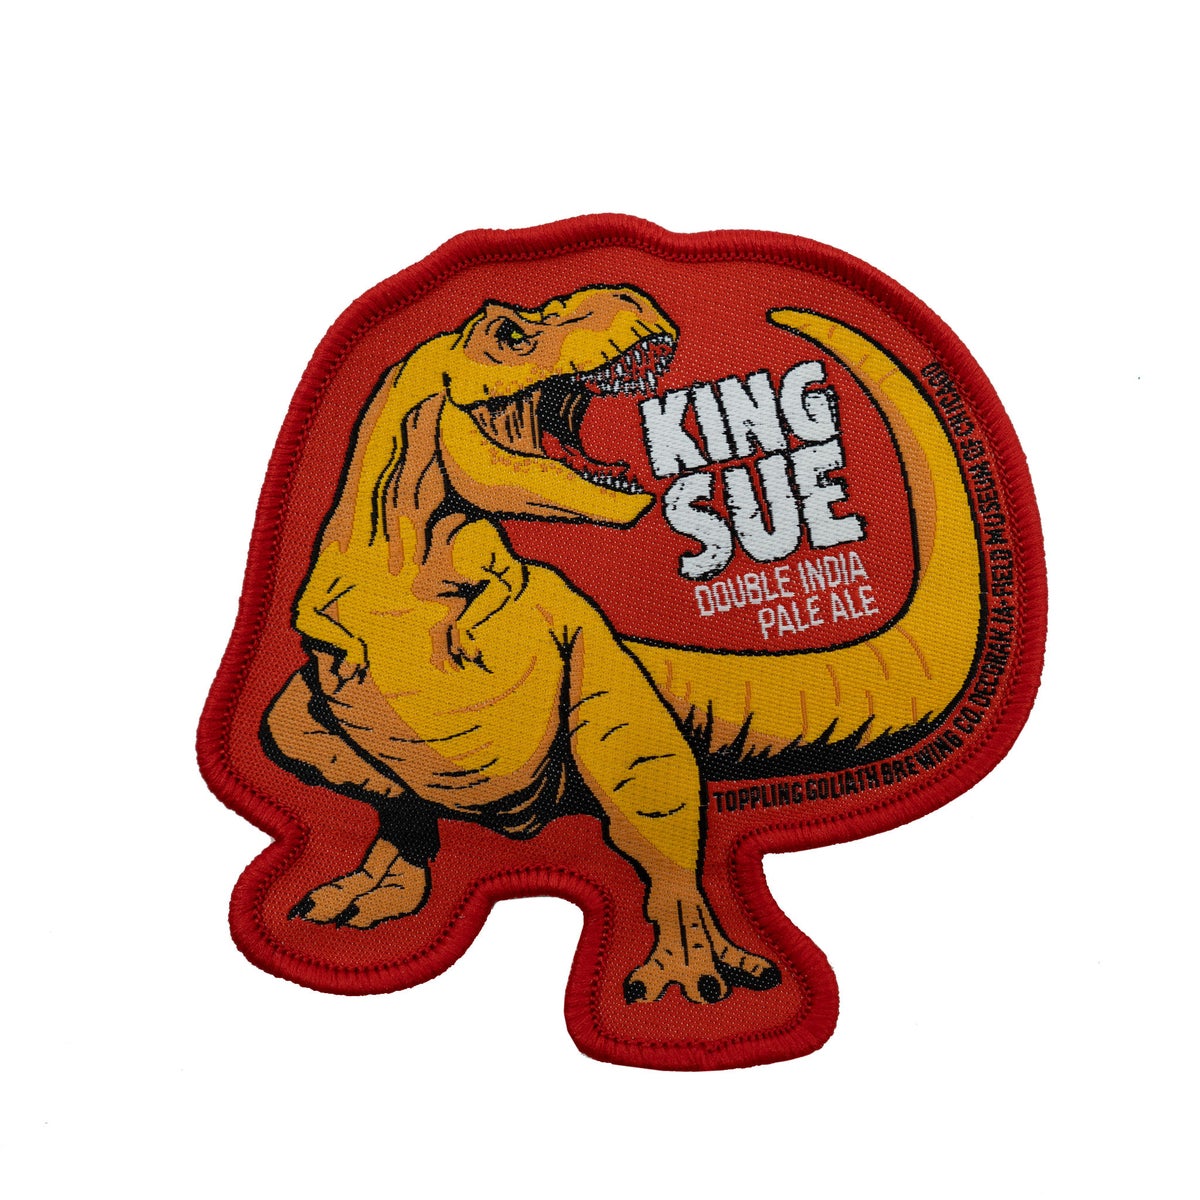 Patch-King Sue